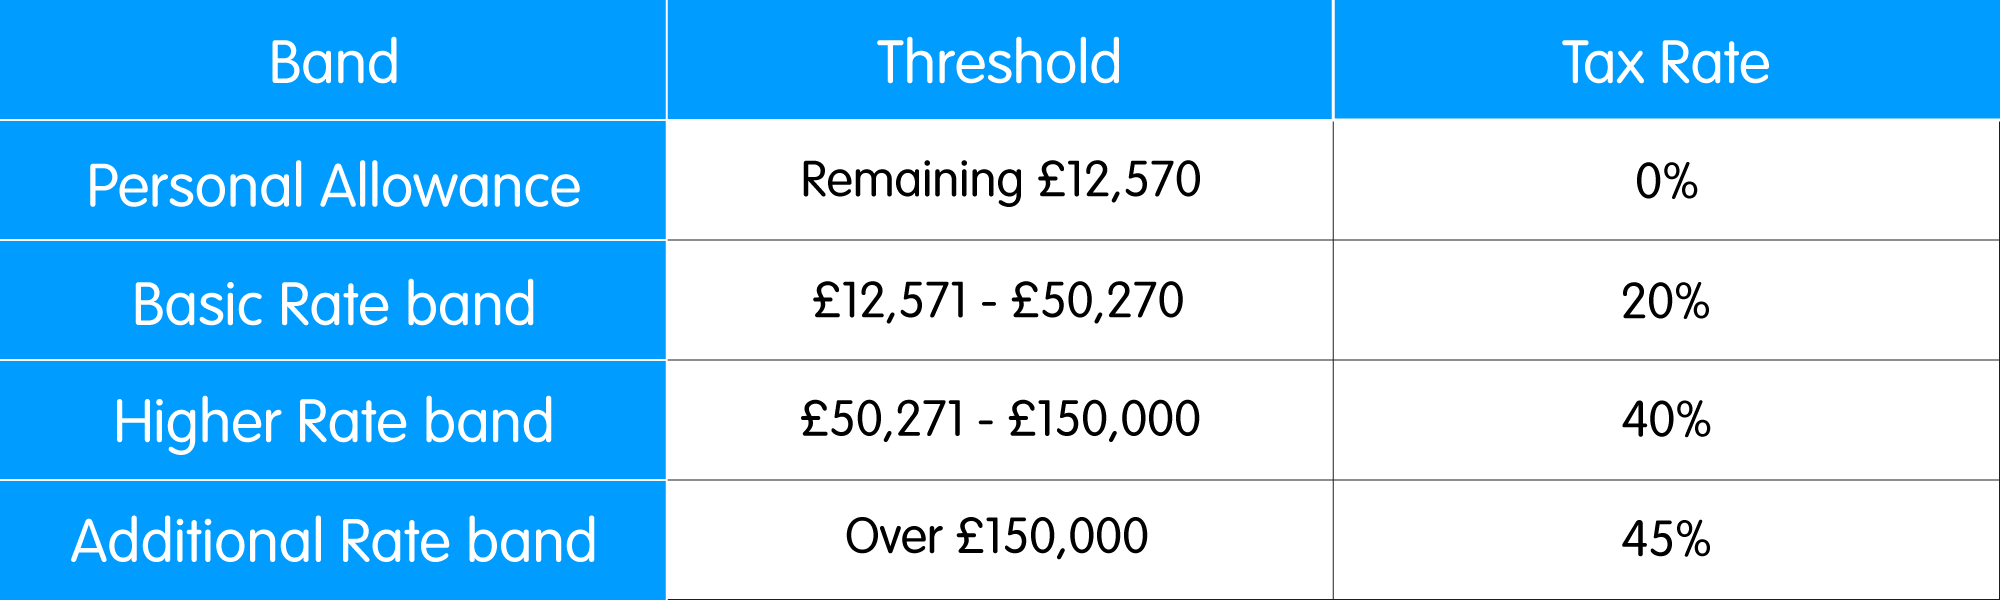 Tax Rates And Thresholds For Uk 